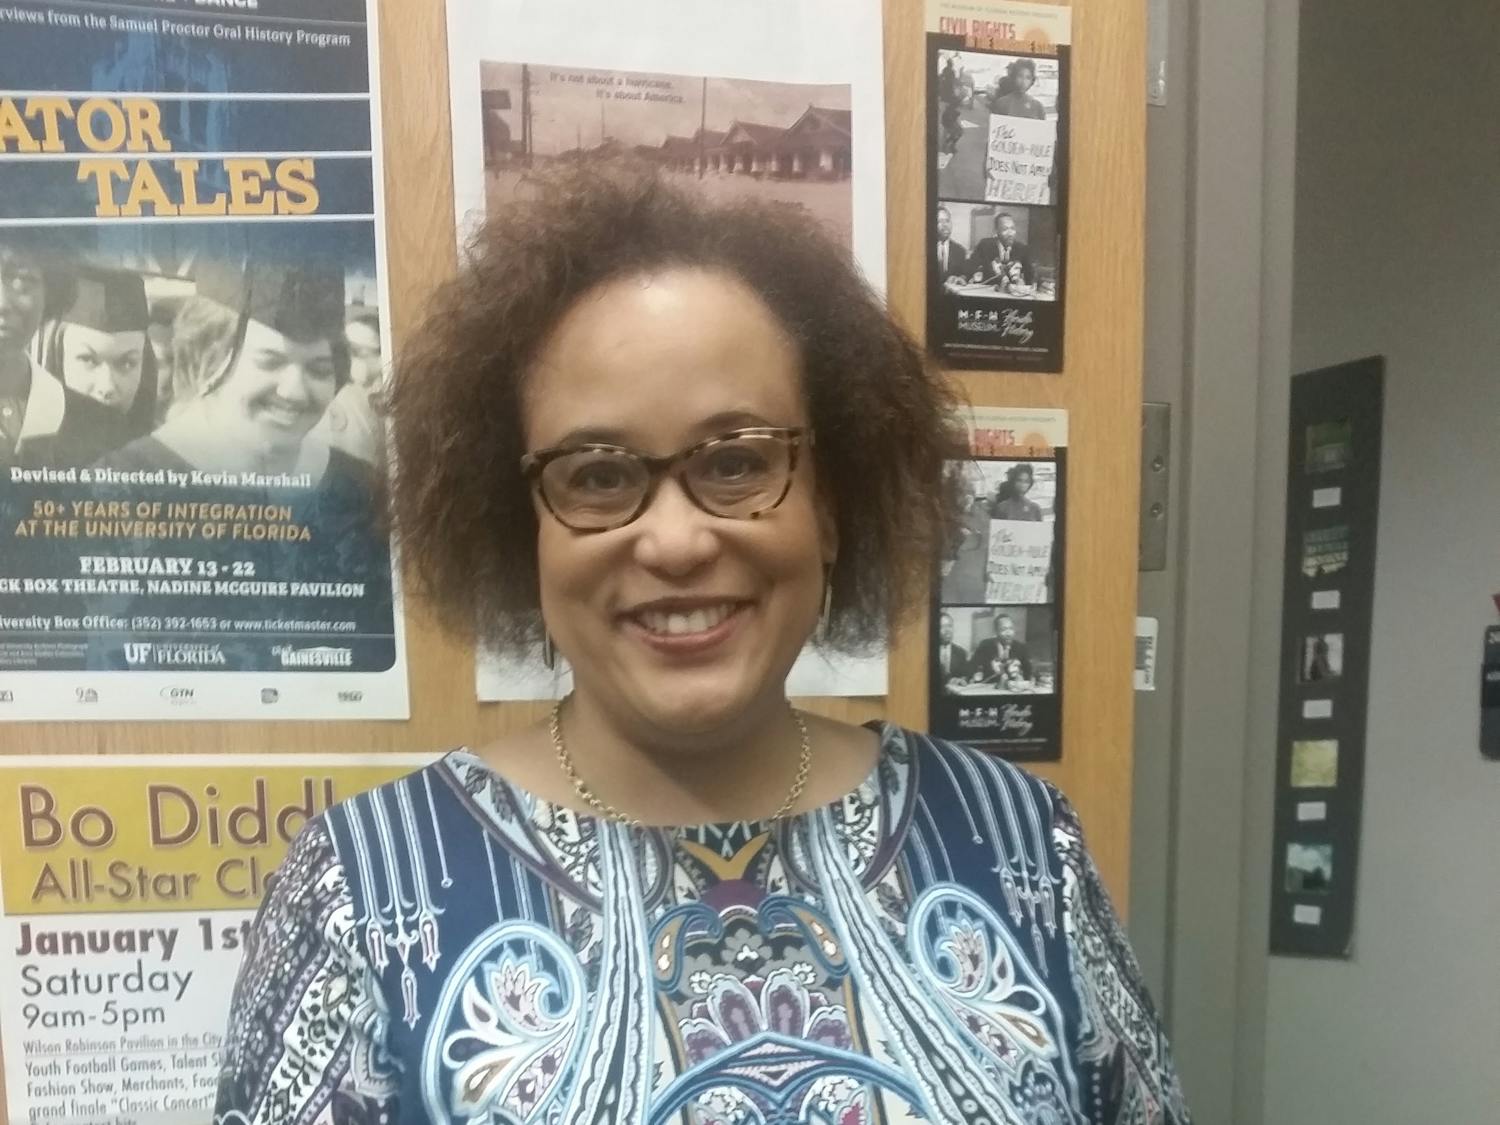 Duchess Harris, a Macalester College American studies professor, spoke to about 80 people Thursday evening in Smathers Library. Her grandmother Miriam Mann was a “human computer” in the 1960s at NASA.  